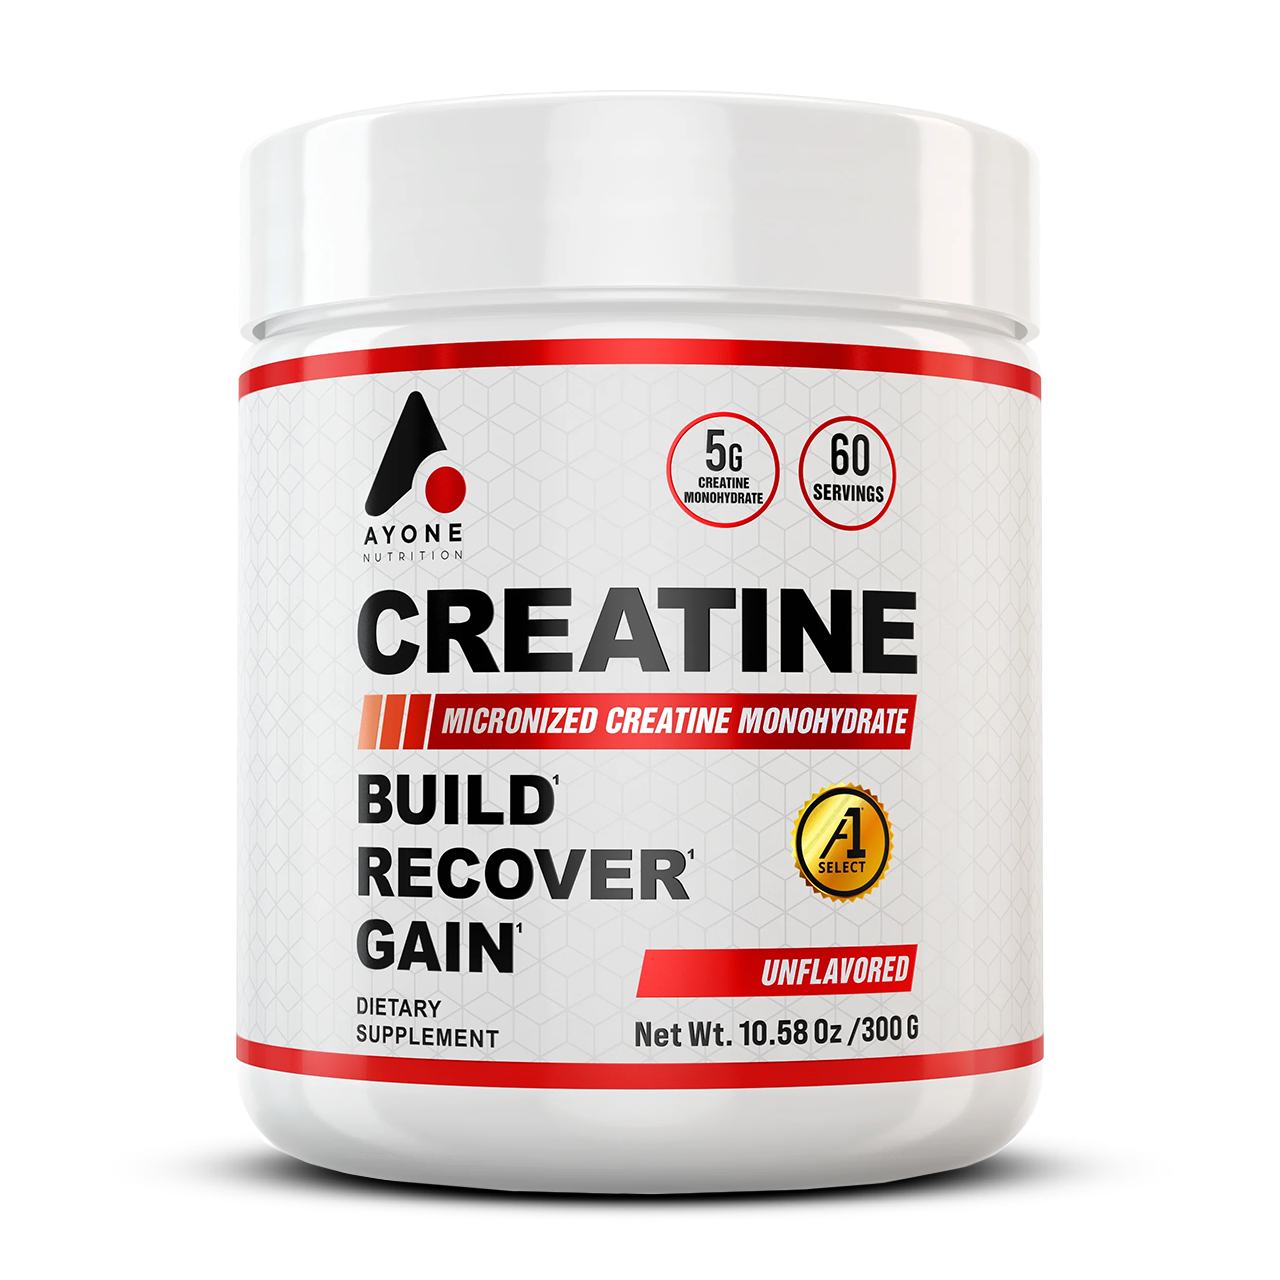 Ayone Nutrition Creatine front of the bottle